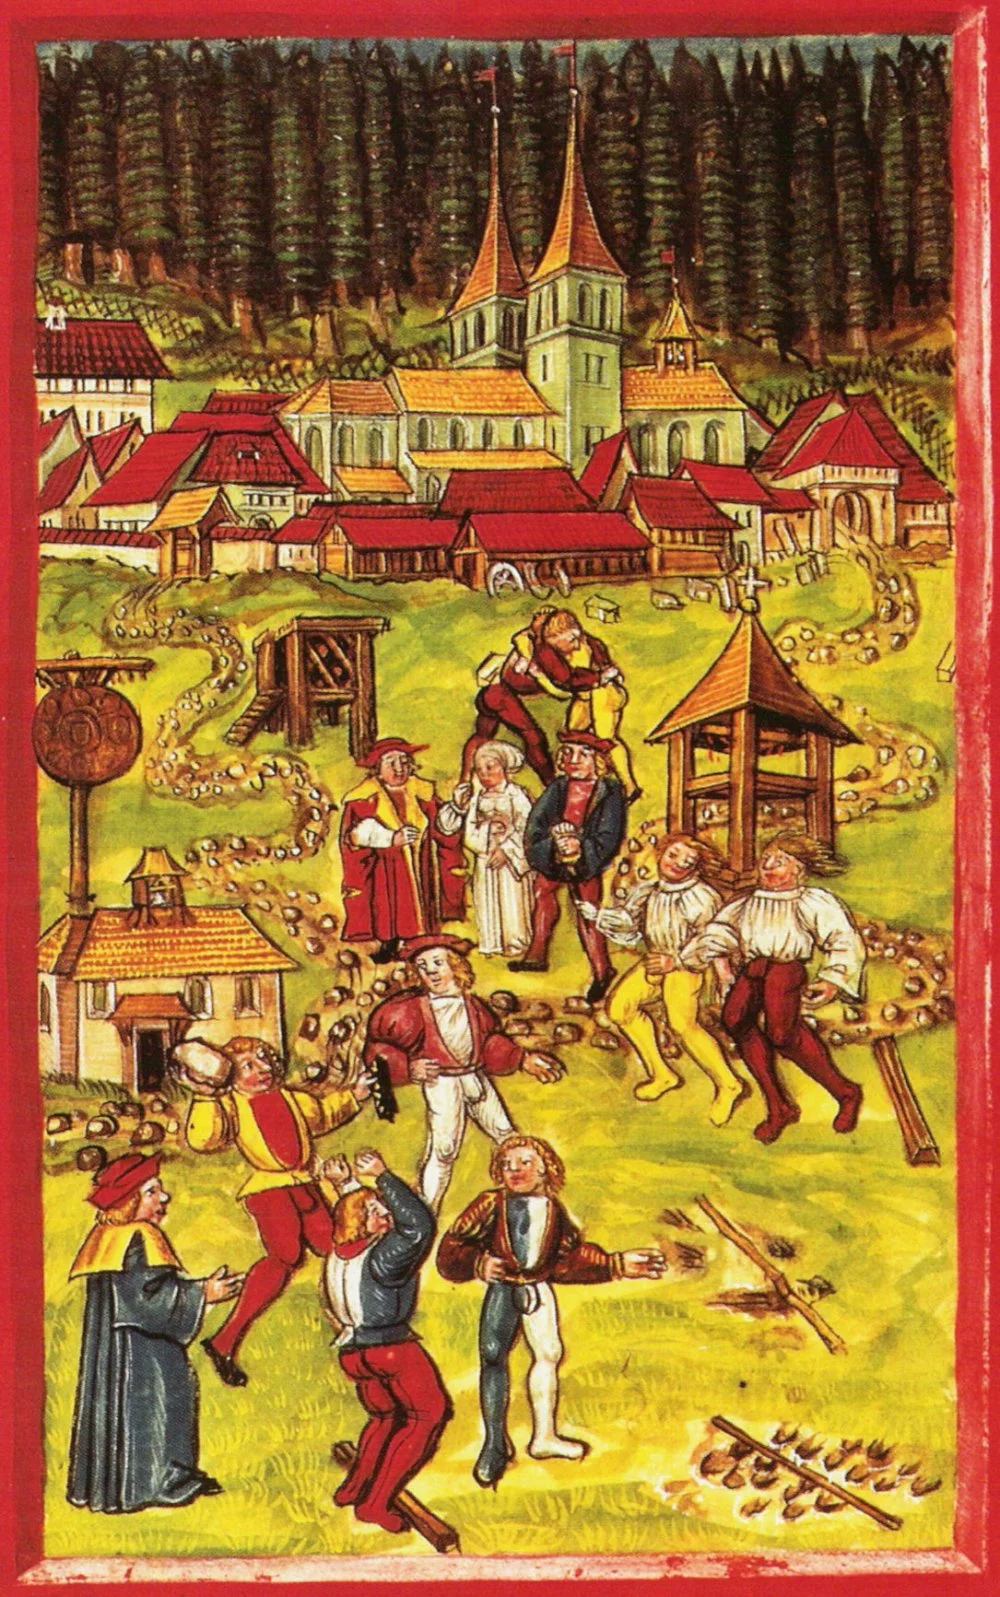 Schilling (Swiss) mercenaries training, including stone putting, wrestling, skipping, and jumping or diving. Lucerne Chronicle, 1513/Wikimedia commons